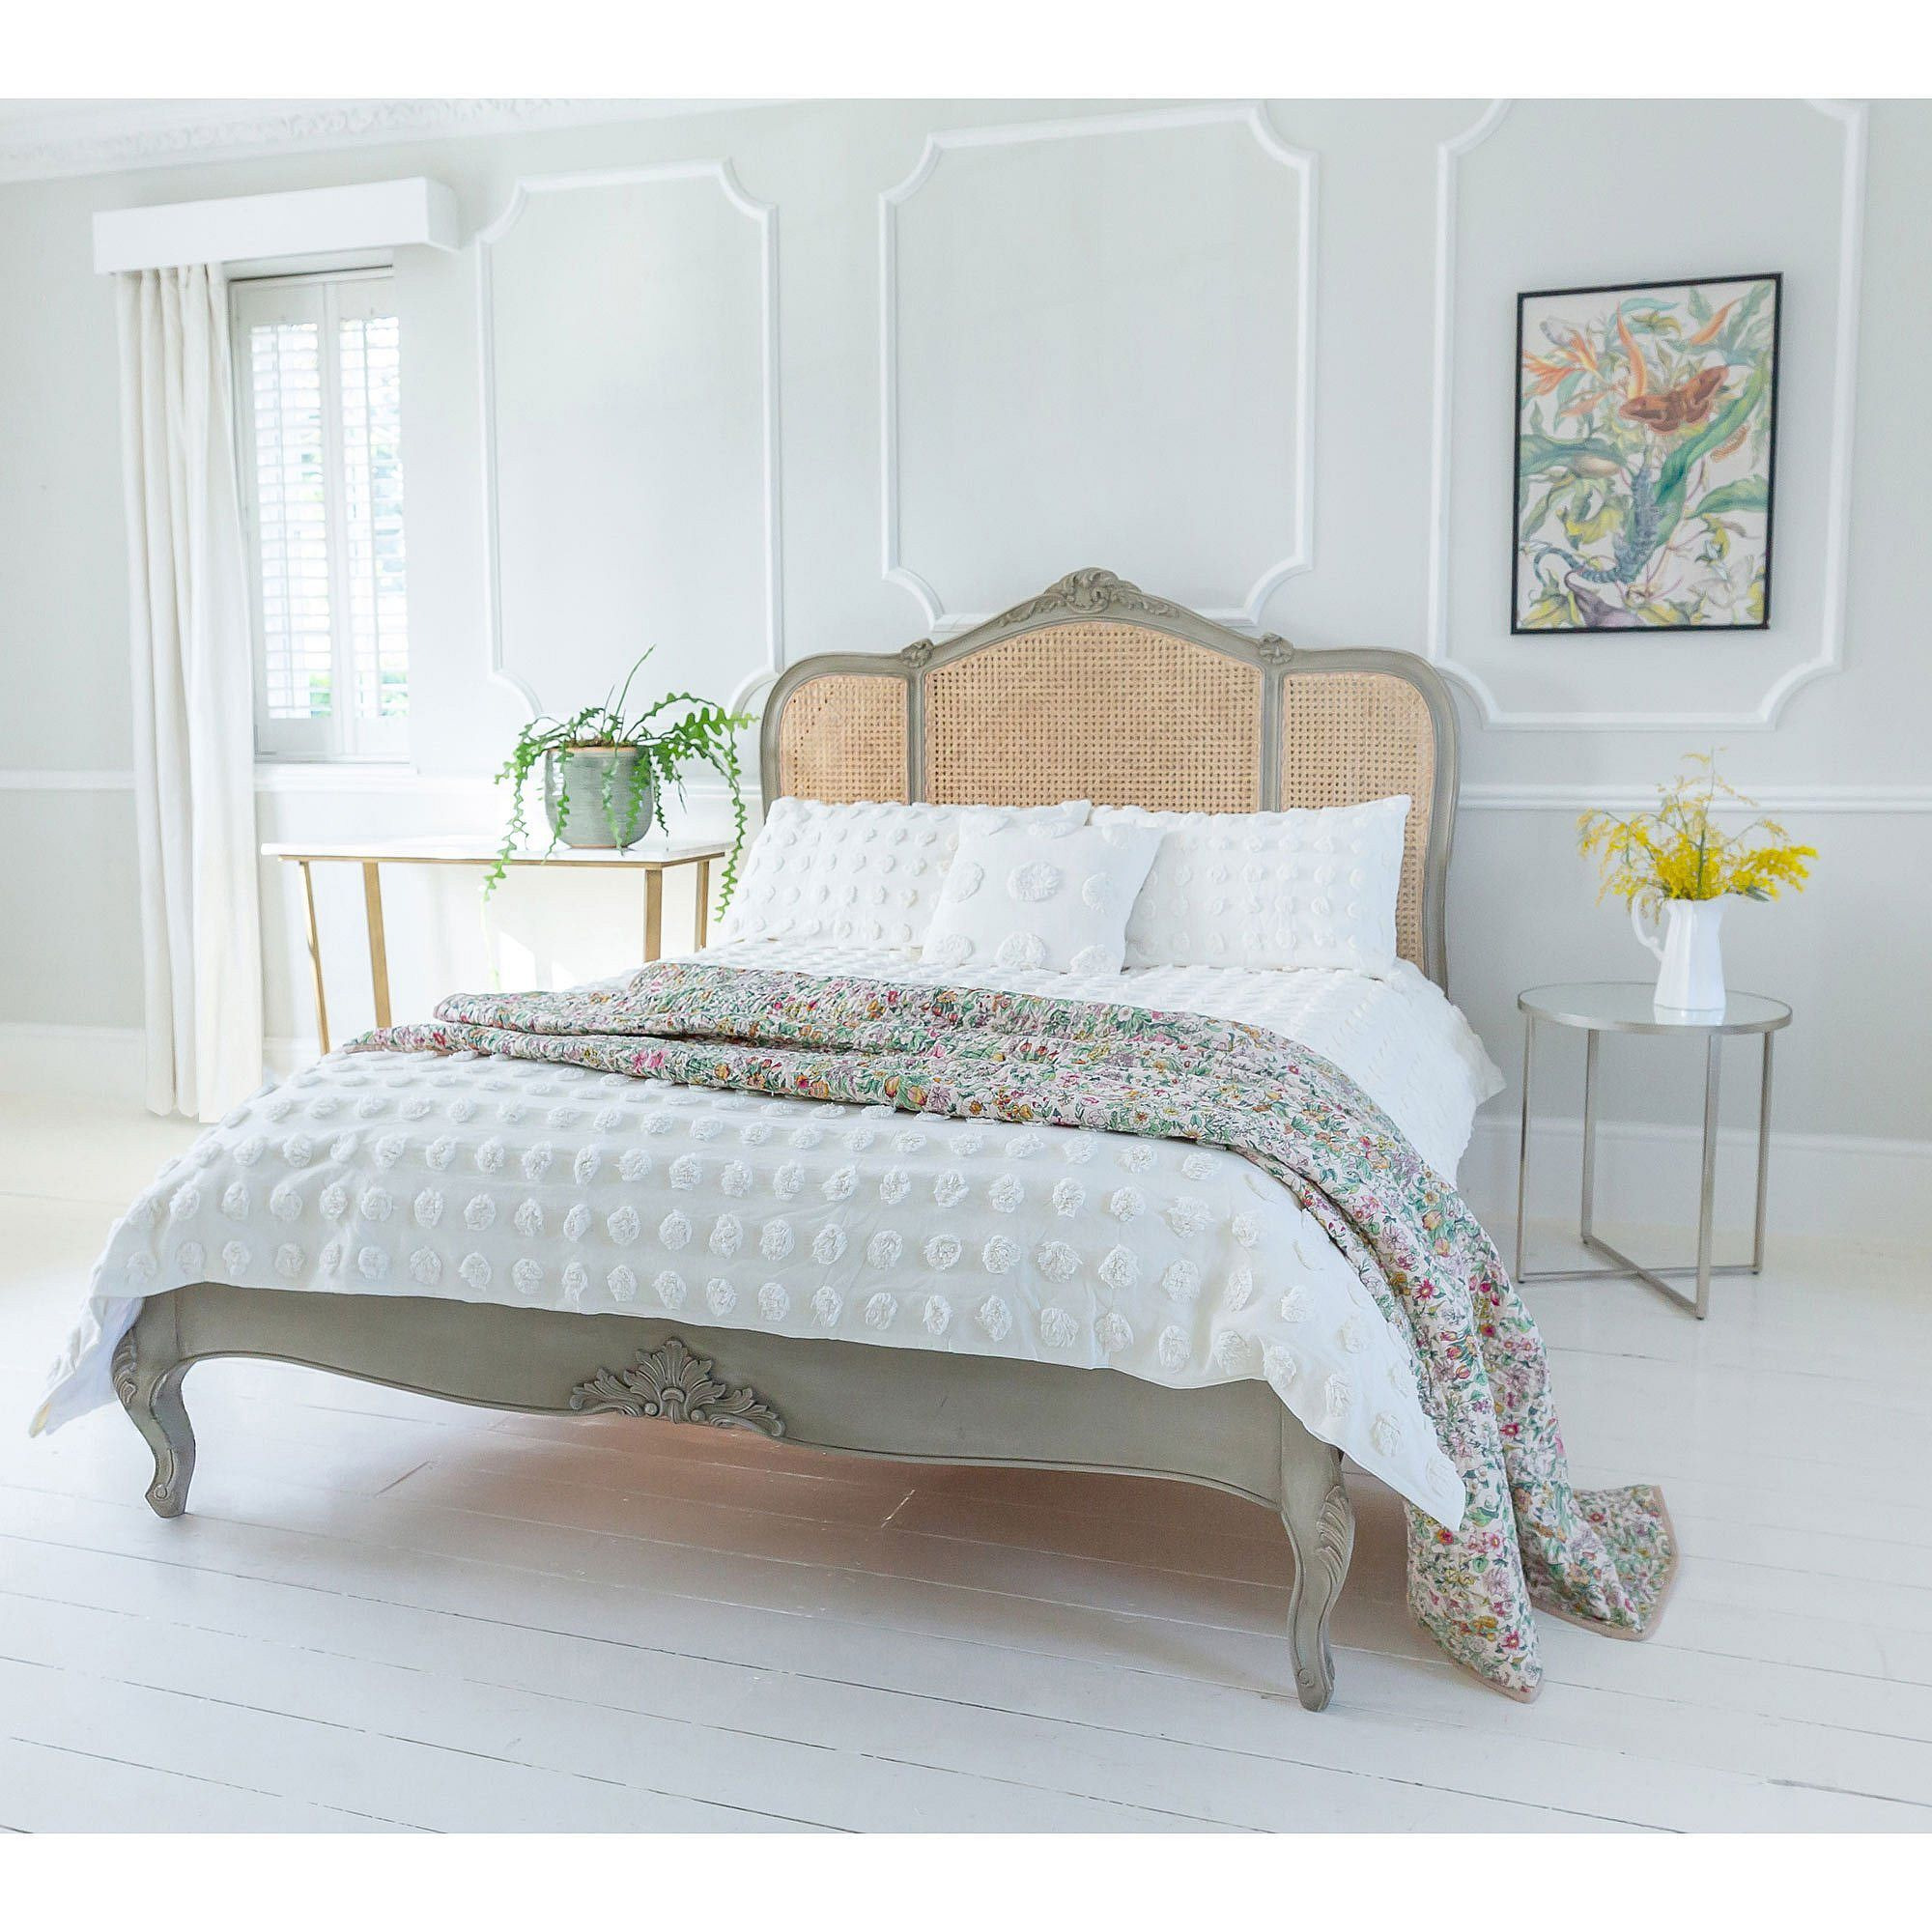 Normandy Rattan Painted, Low Footboard Luxury Bed (King) - image 1